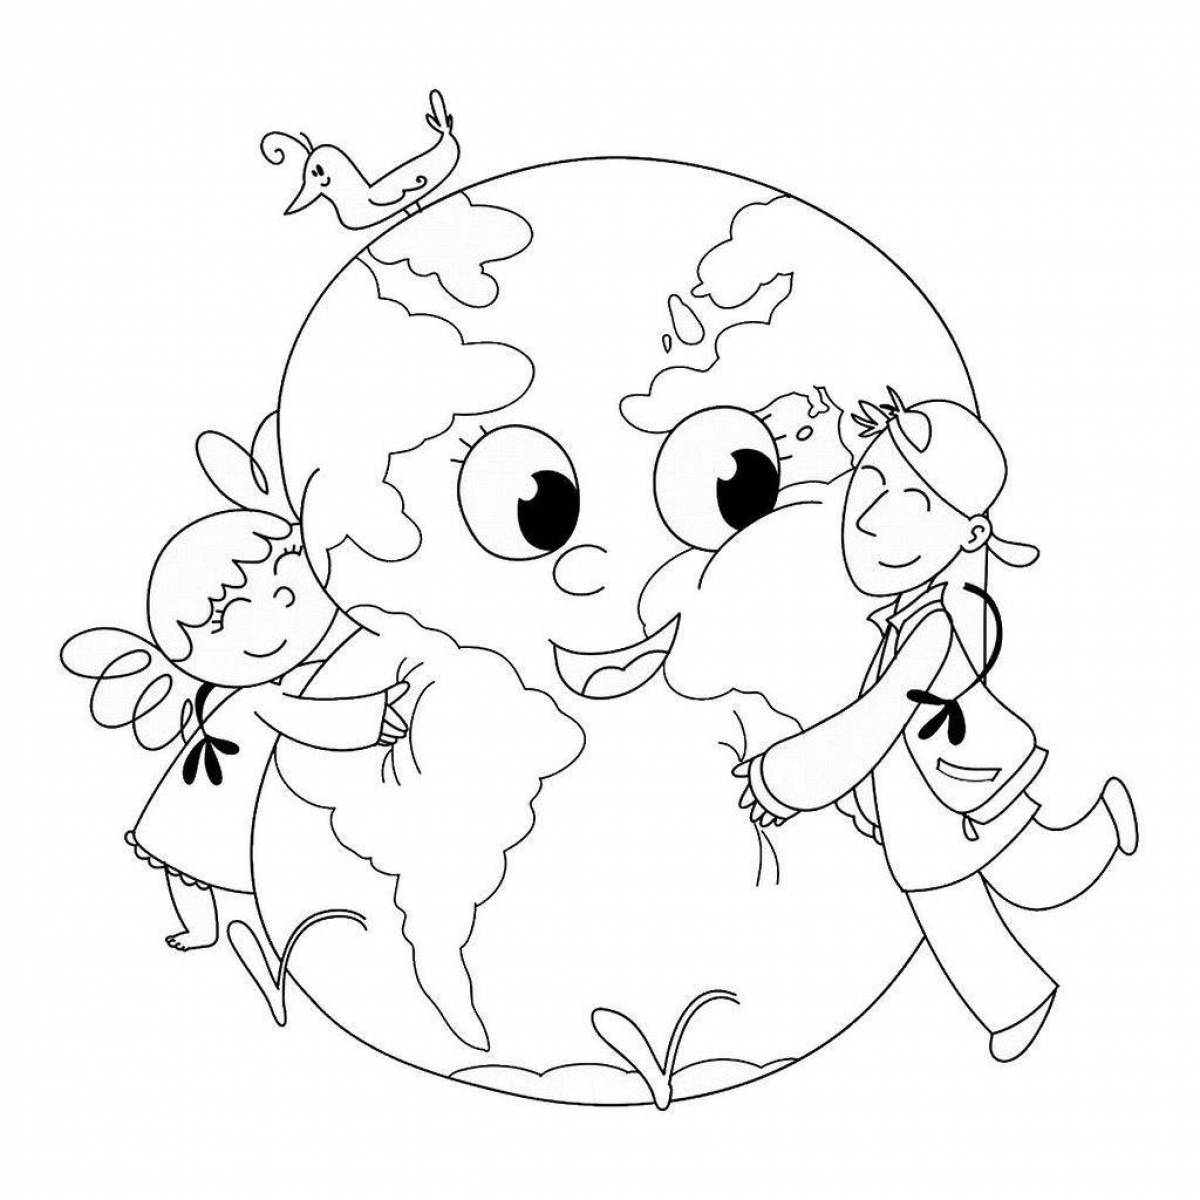 Playfilled coloring page land for kids